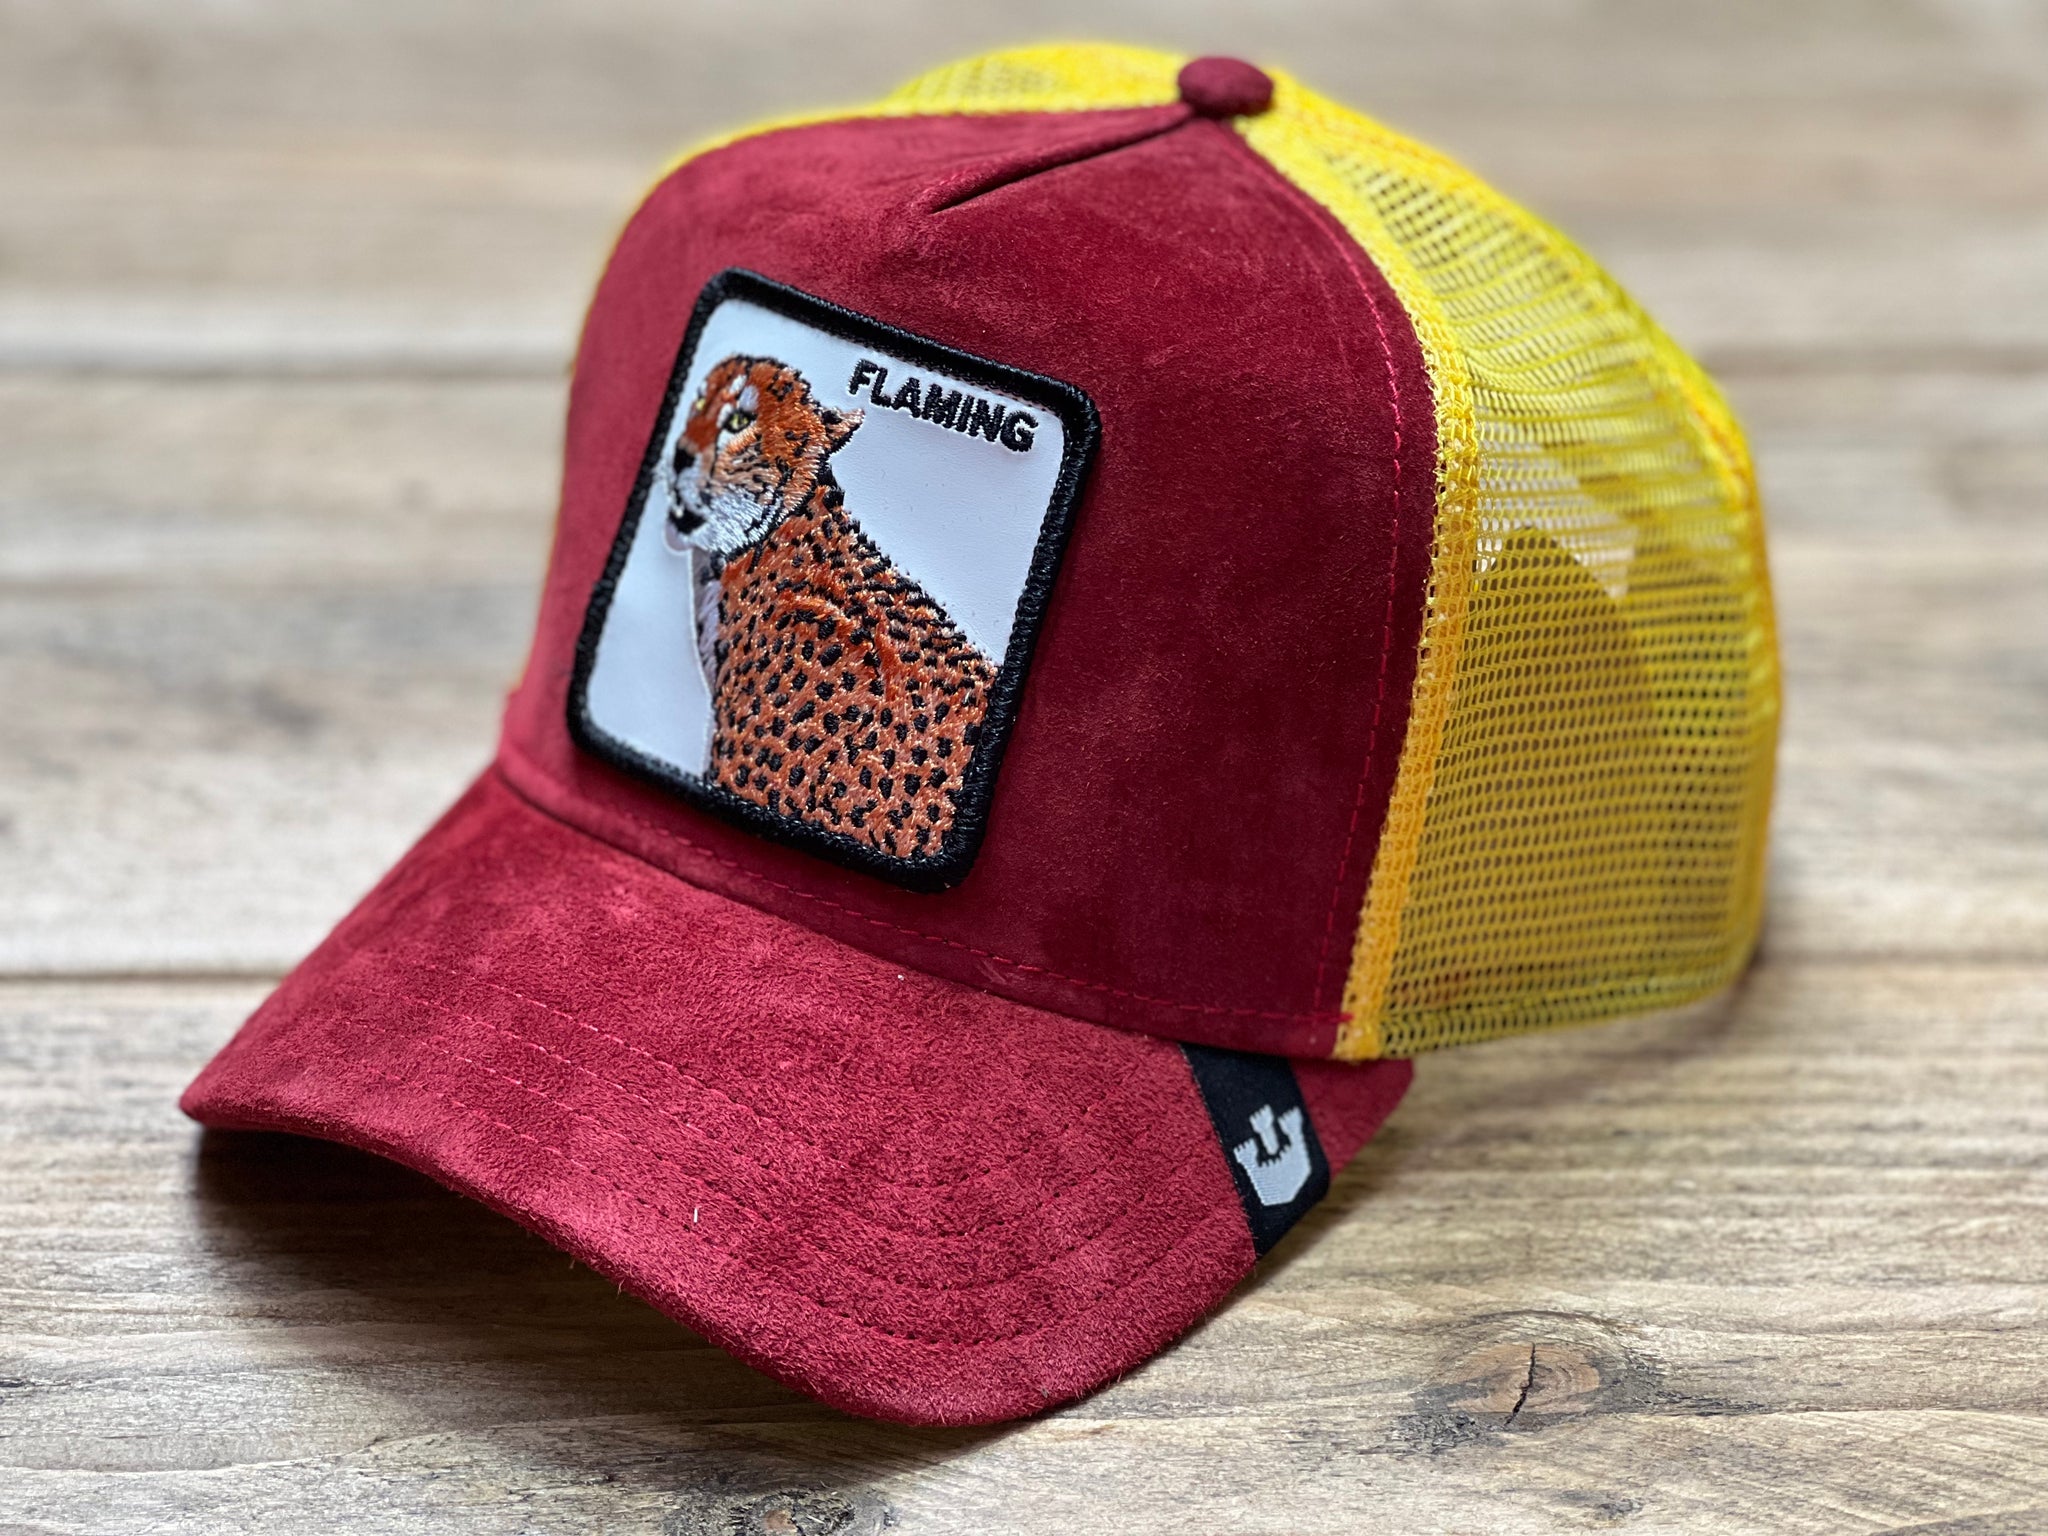 Goorin The Farm trucker cap collection Hot Cheetah Red 1010871 One Size